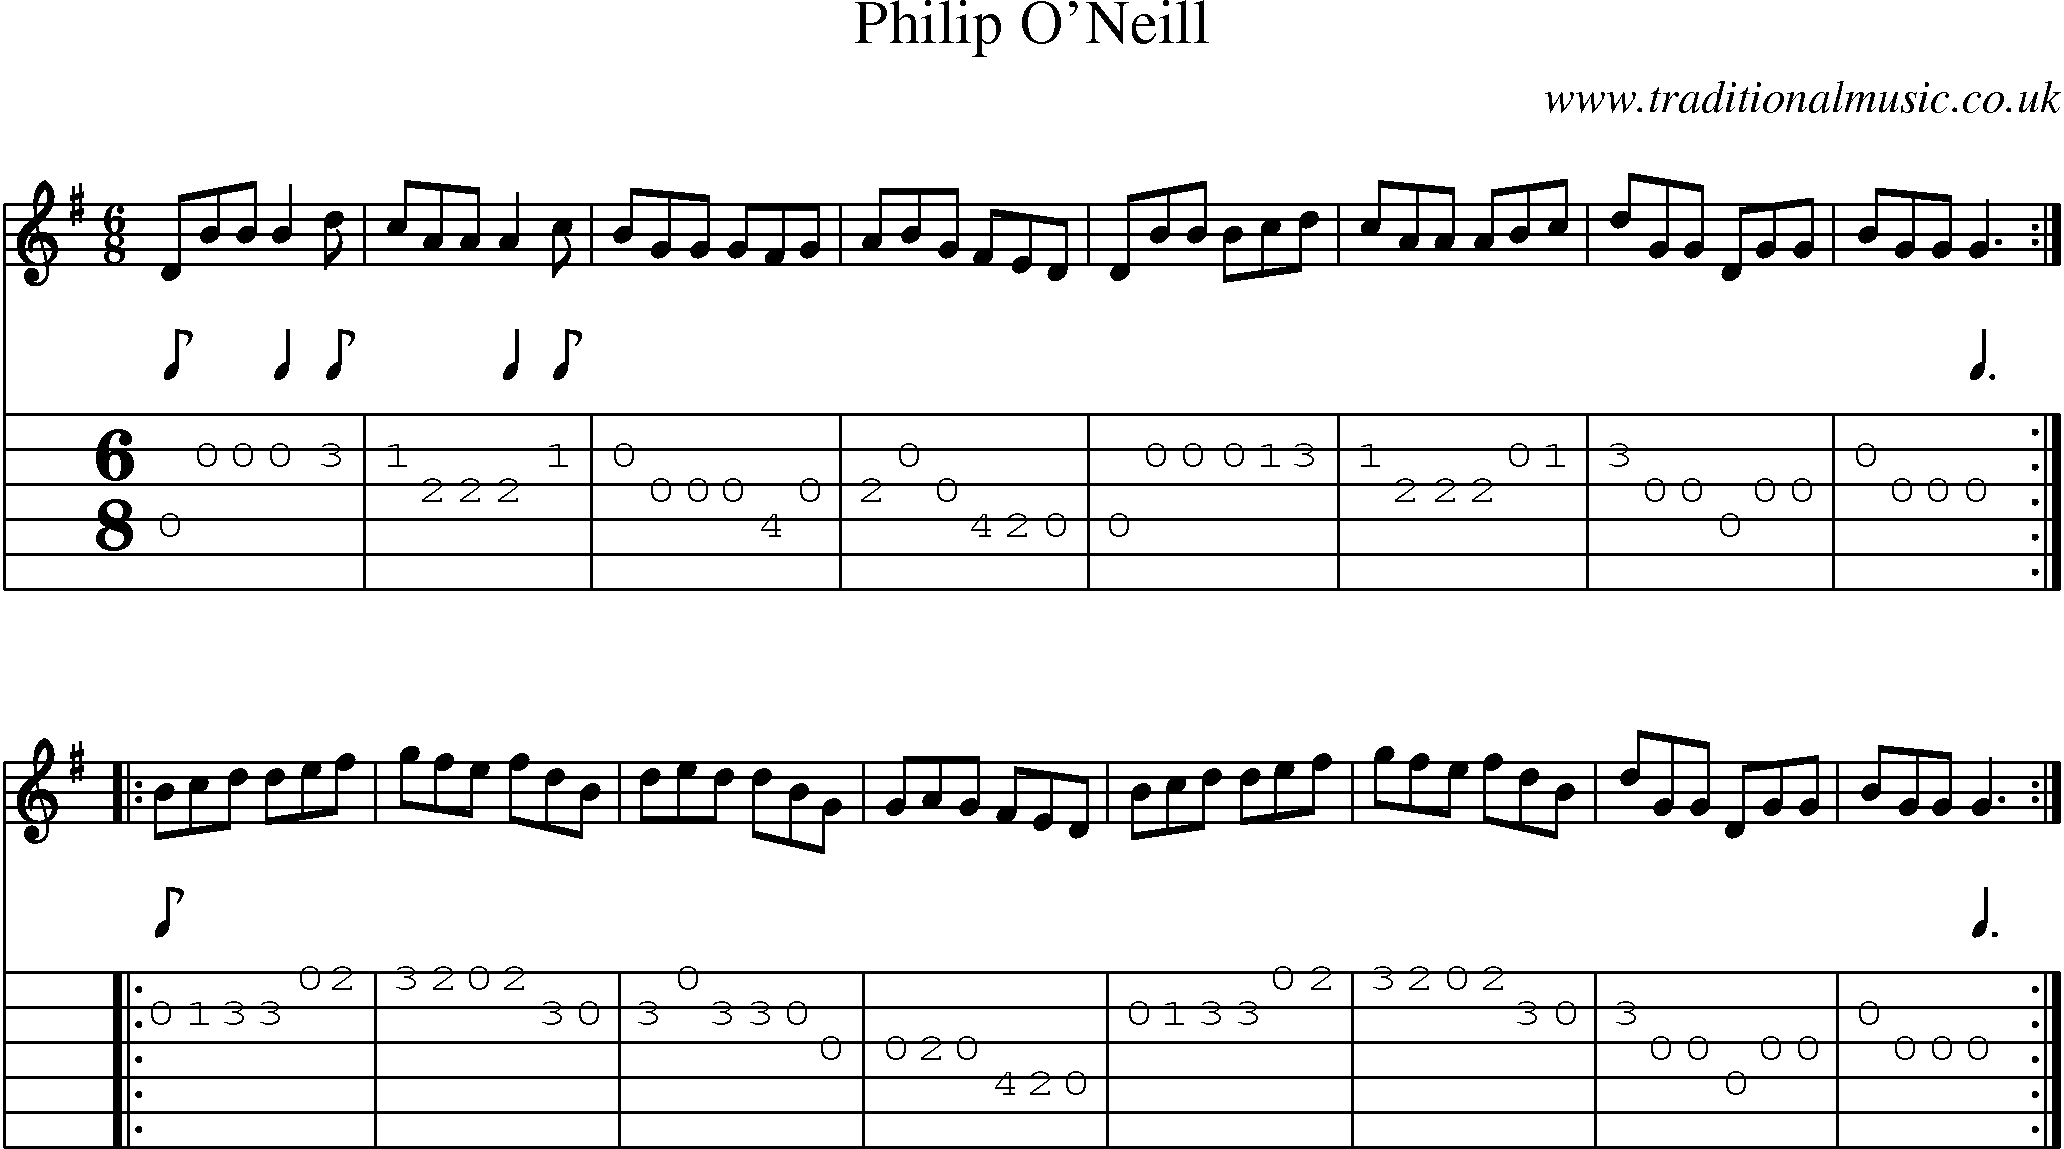 Music Score and Guitar Tabs for Philip O Neill